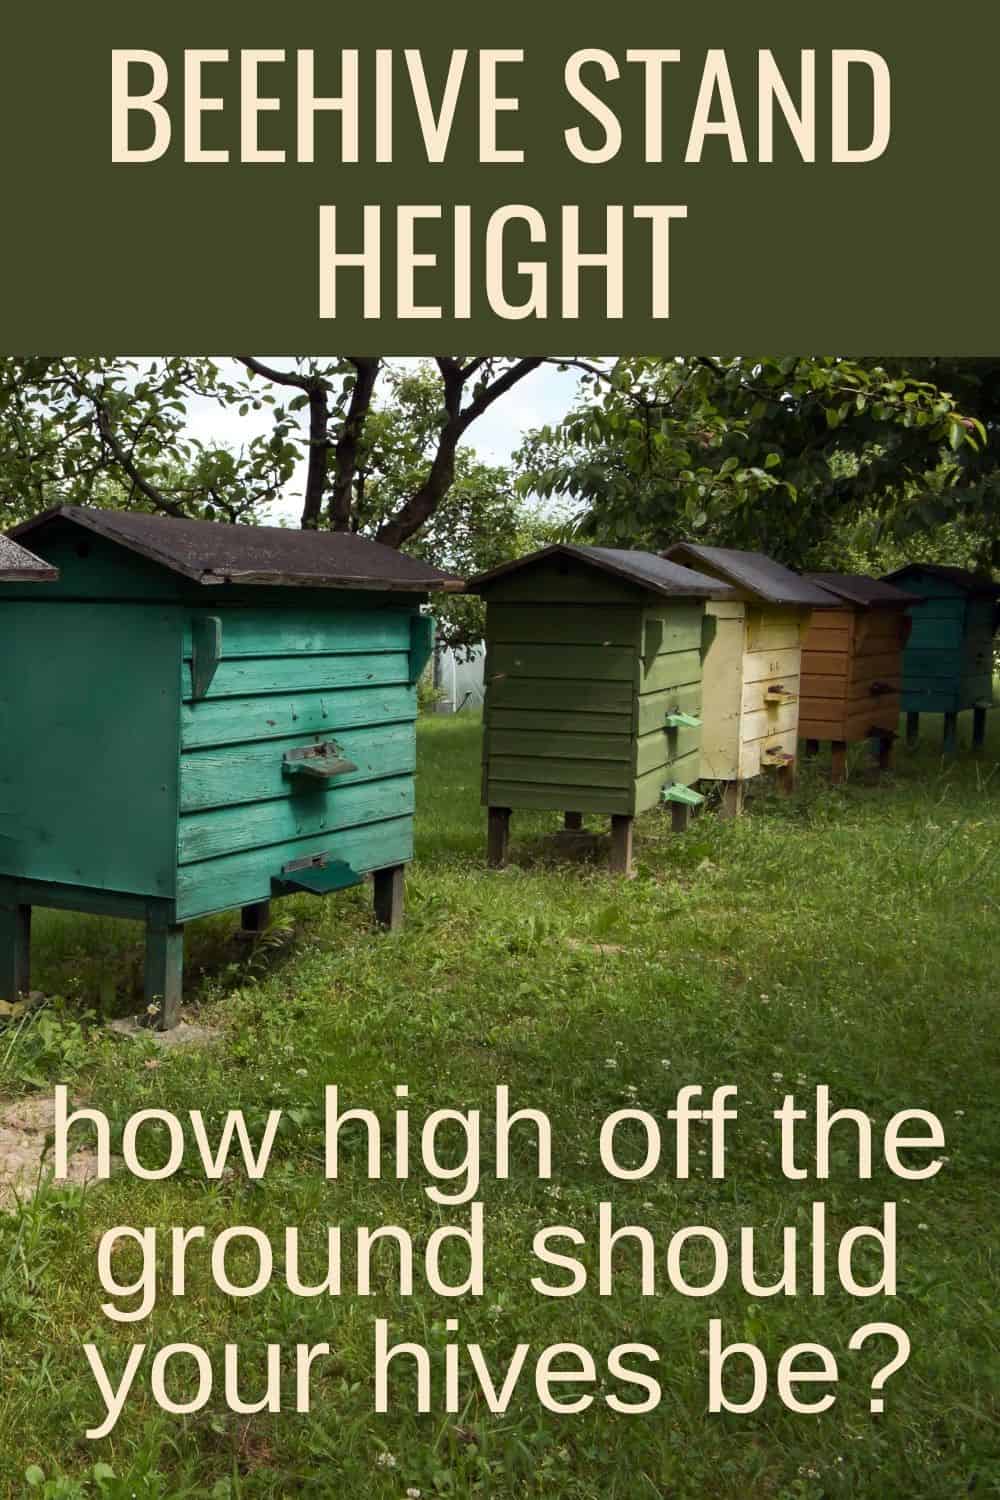 Beehive stand height: how high off the ground should your hives be